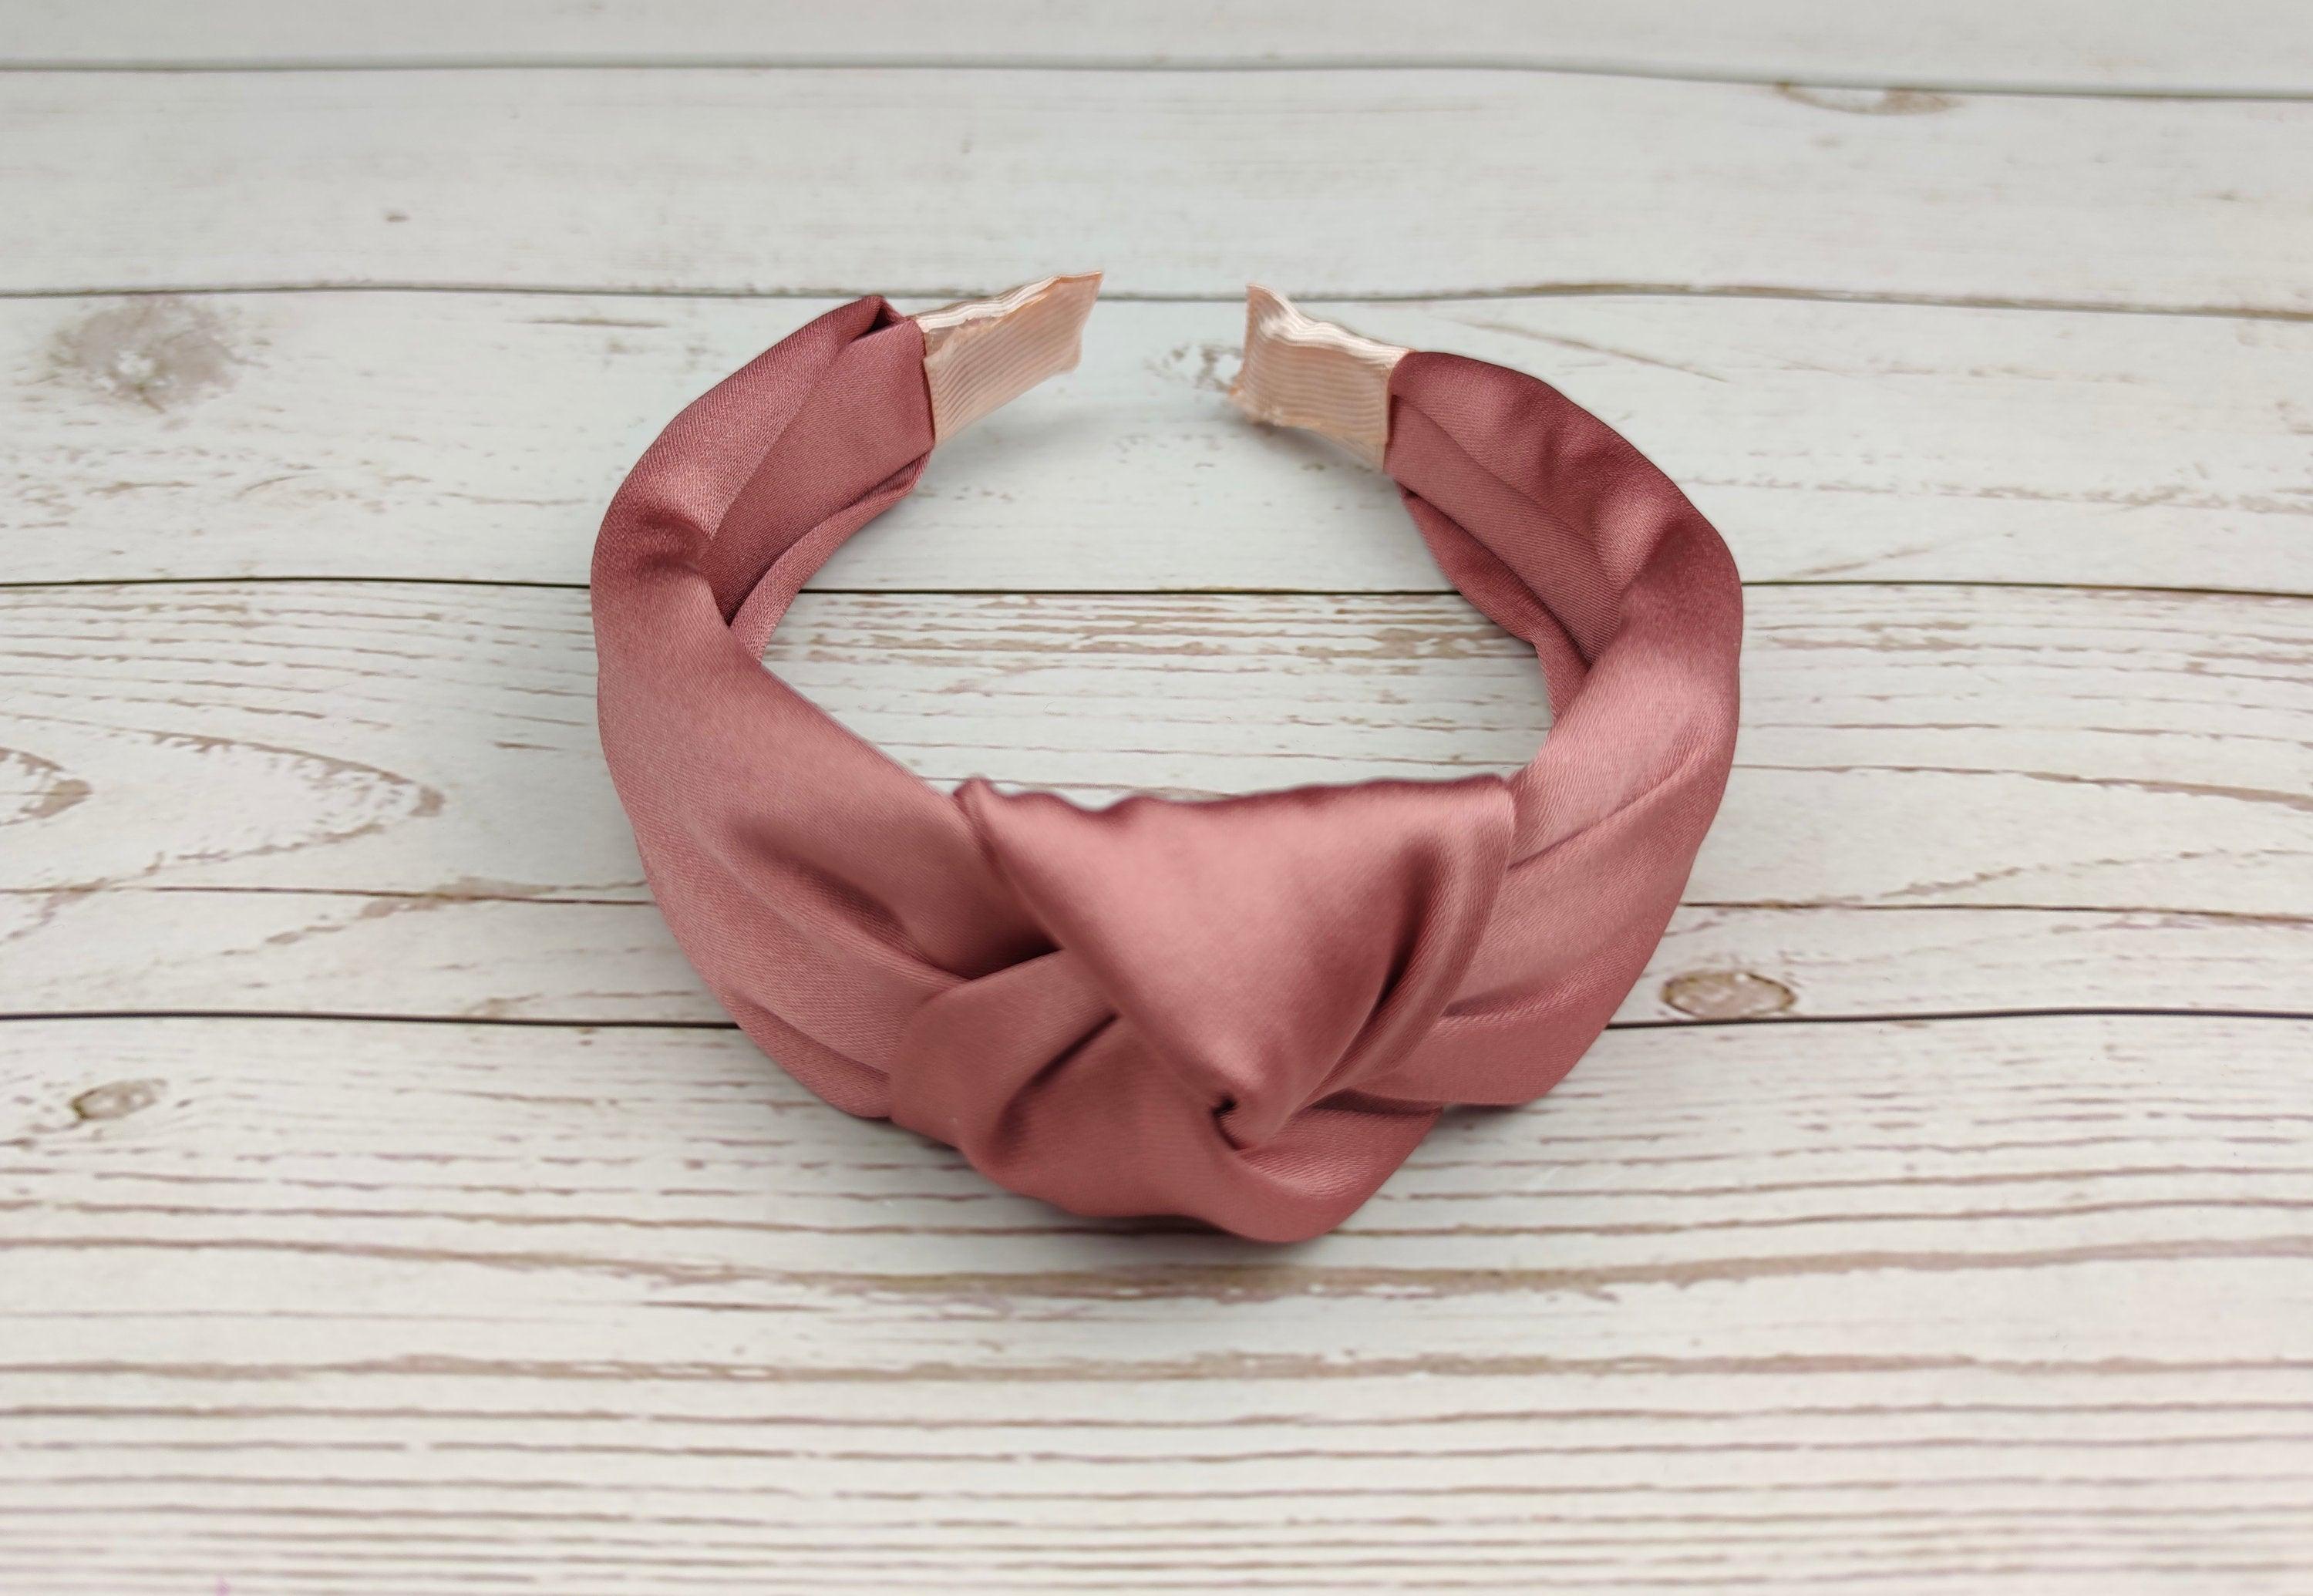 High-Quality Satin Salmon Pink Knotted Headband - Women's Fashionable Hair Accessory in Pastel Pink Turban Style available at Moyoni Design